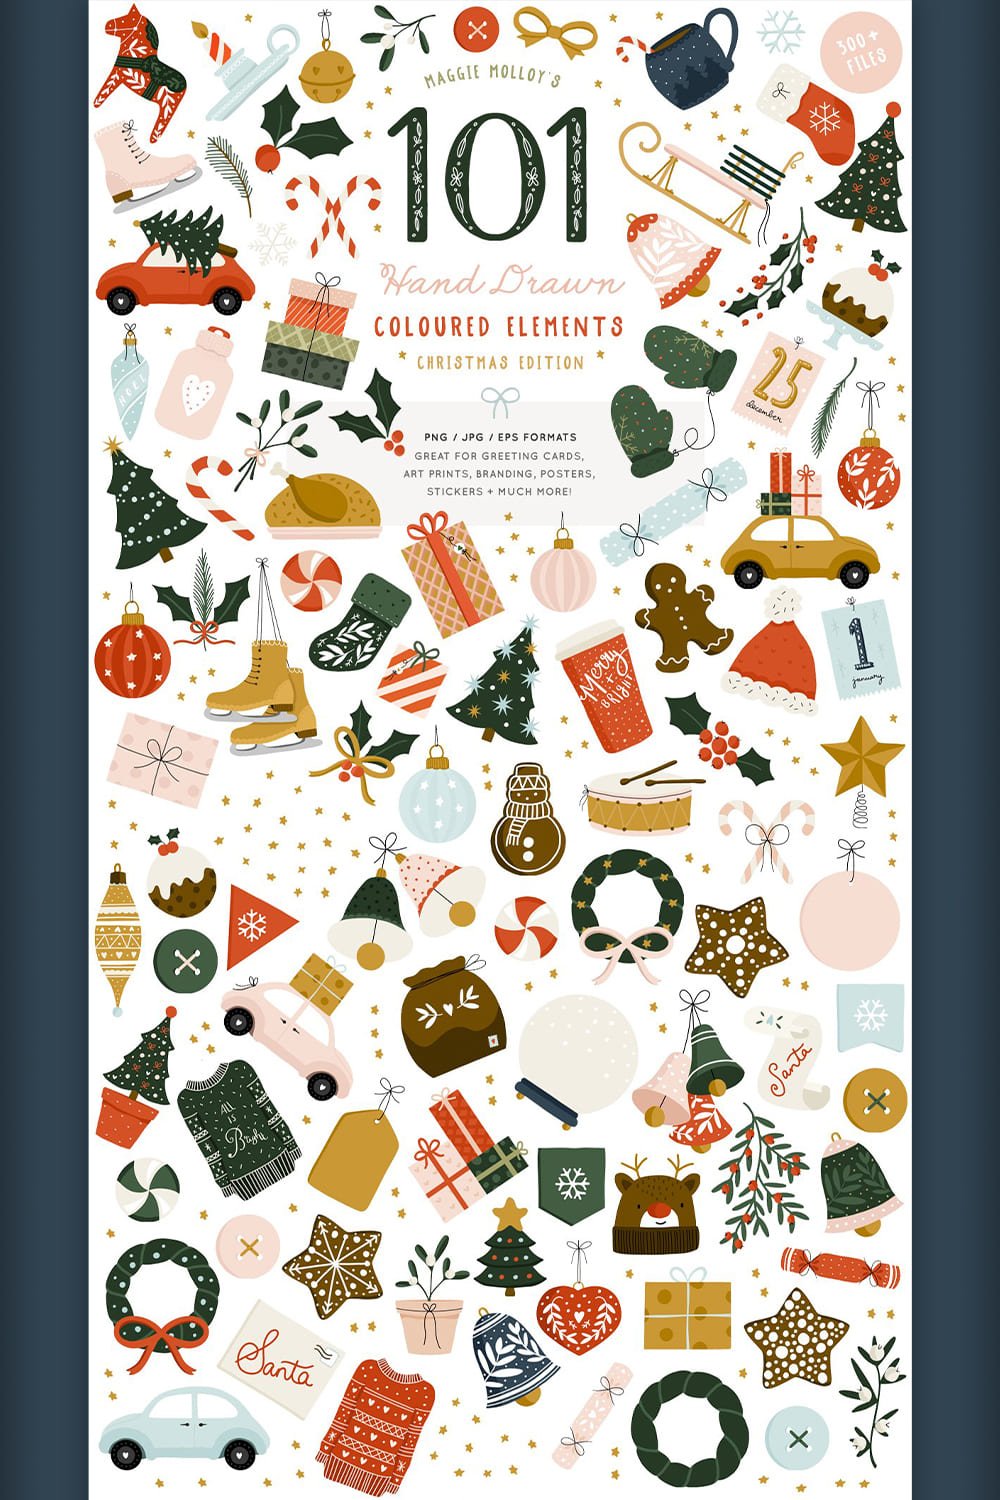 Pinterest Christmas Image With Many Works.